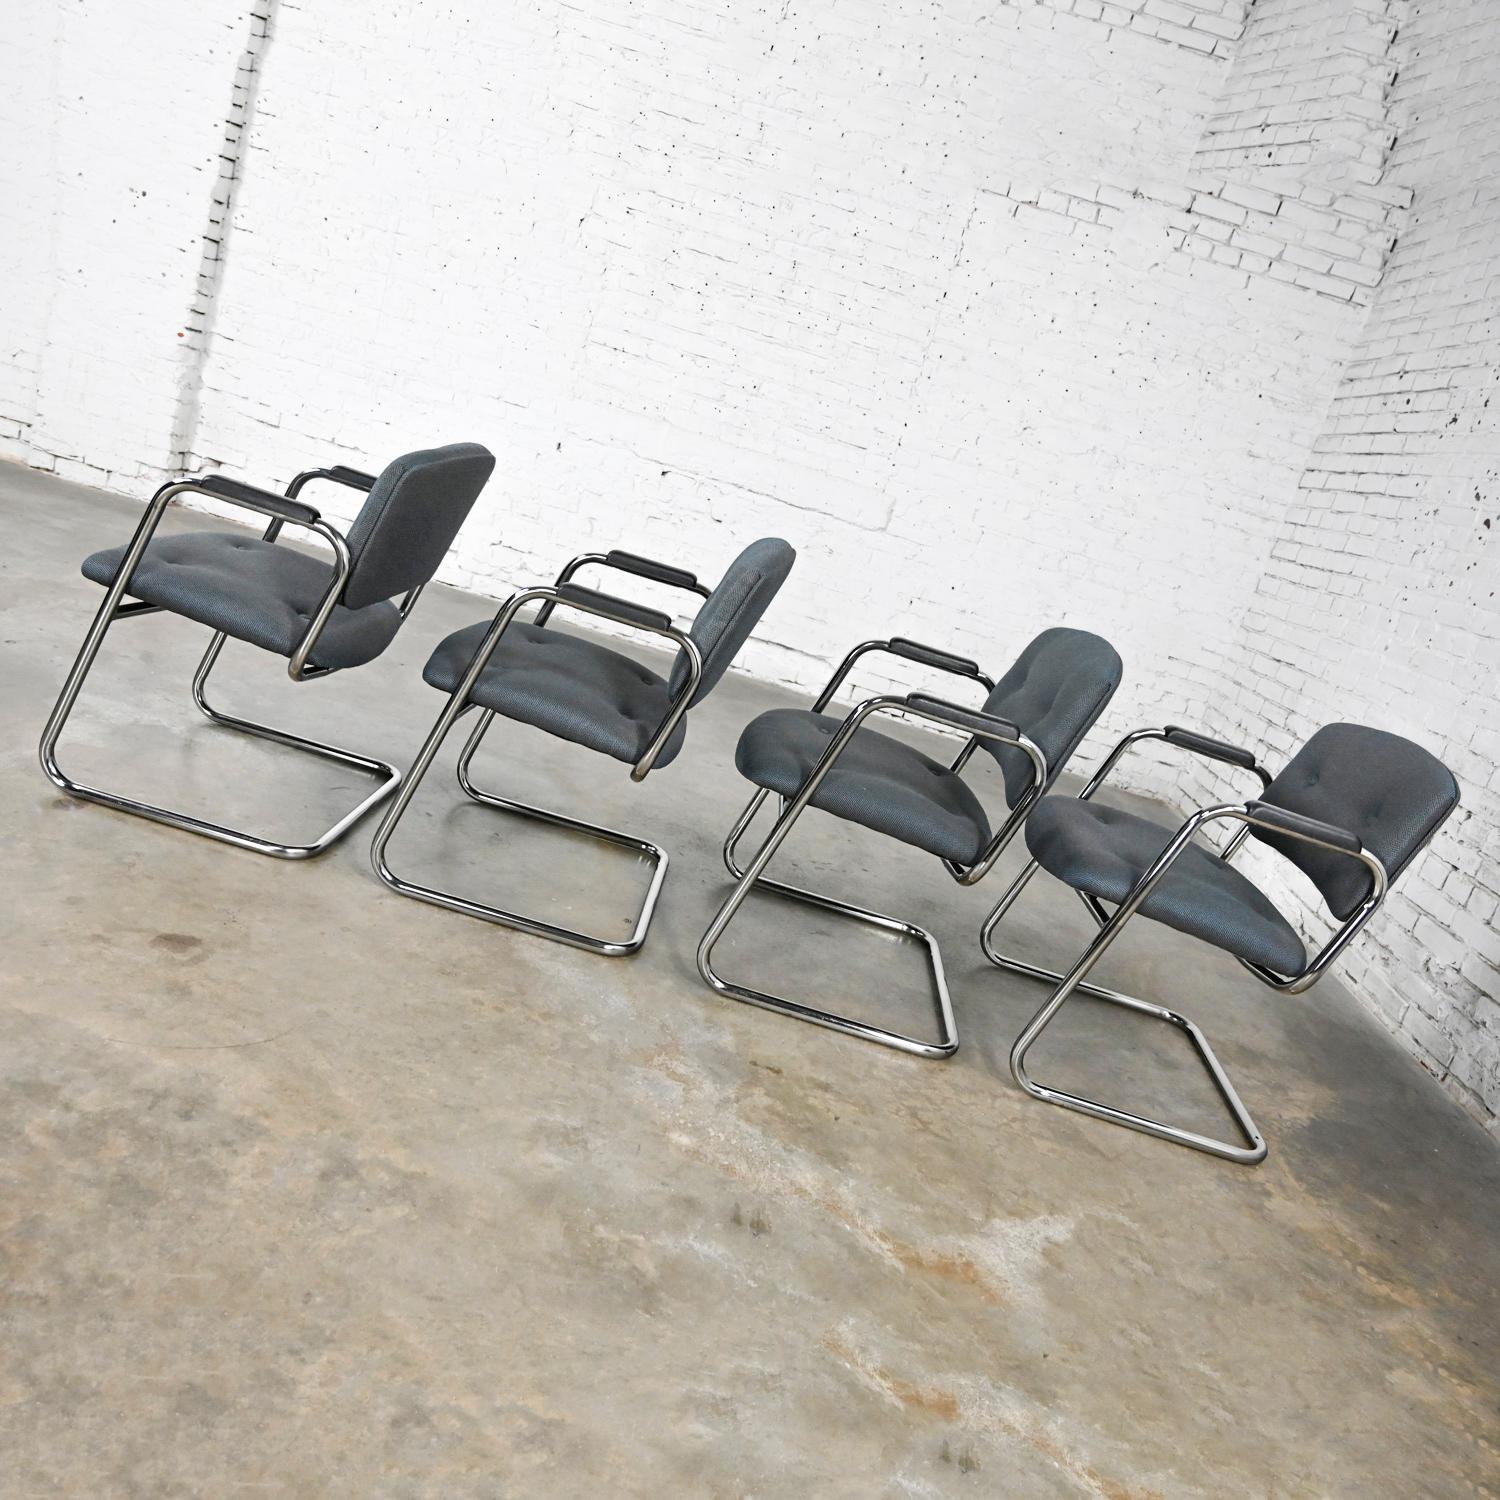 Late 20th Century Gray & Chrome Cantilever Chairs Style Steelcase Set of 4 For Sale 3